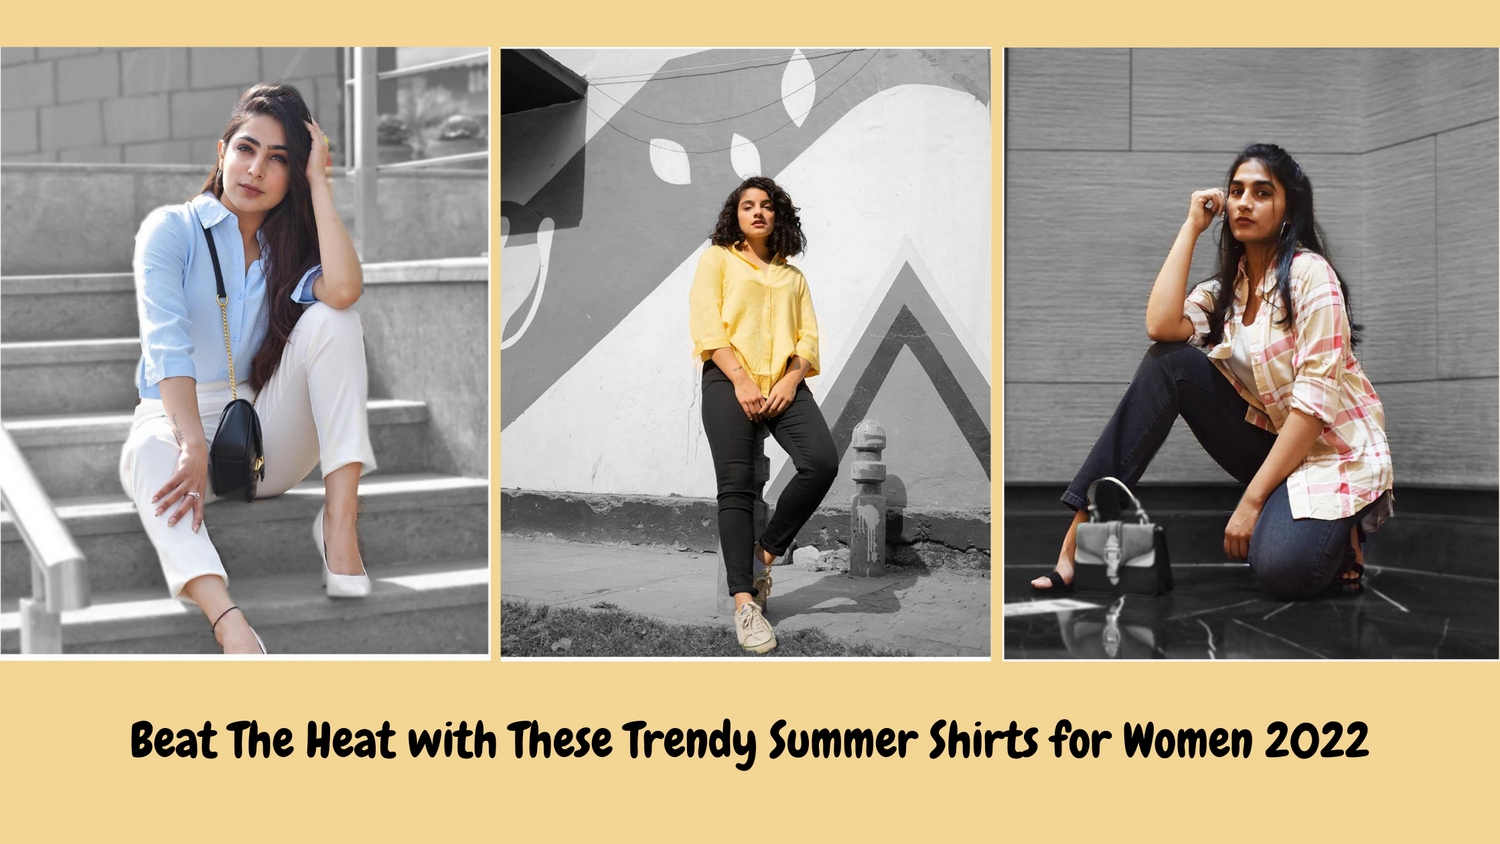 Beat The Heat with These Trendy Summer Shirts for Women 2022